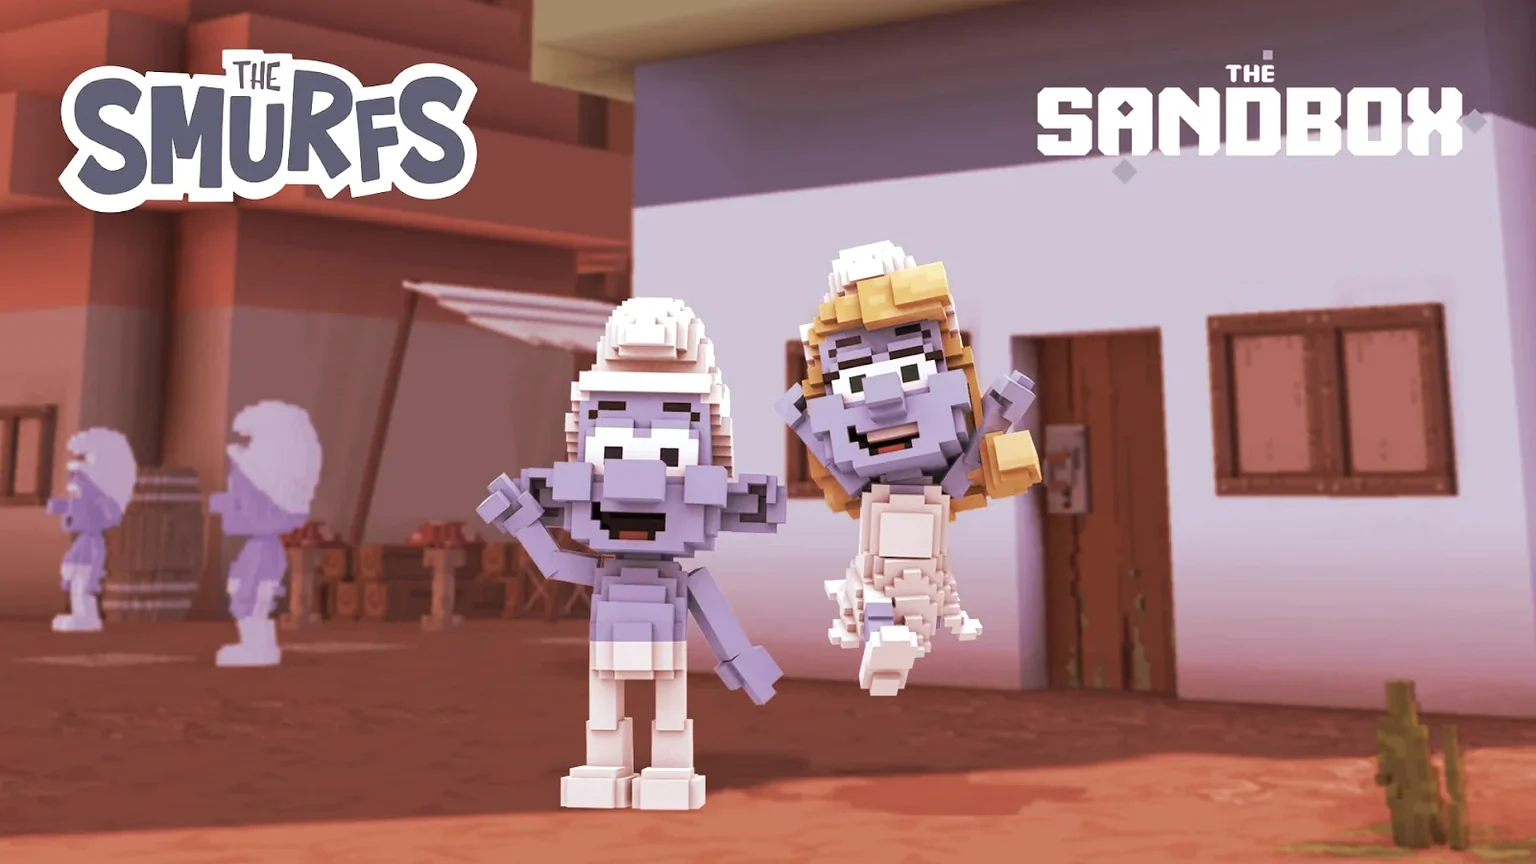 The Smurfs come to The Sandbox. Image credit: The Smurfs